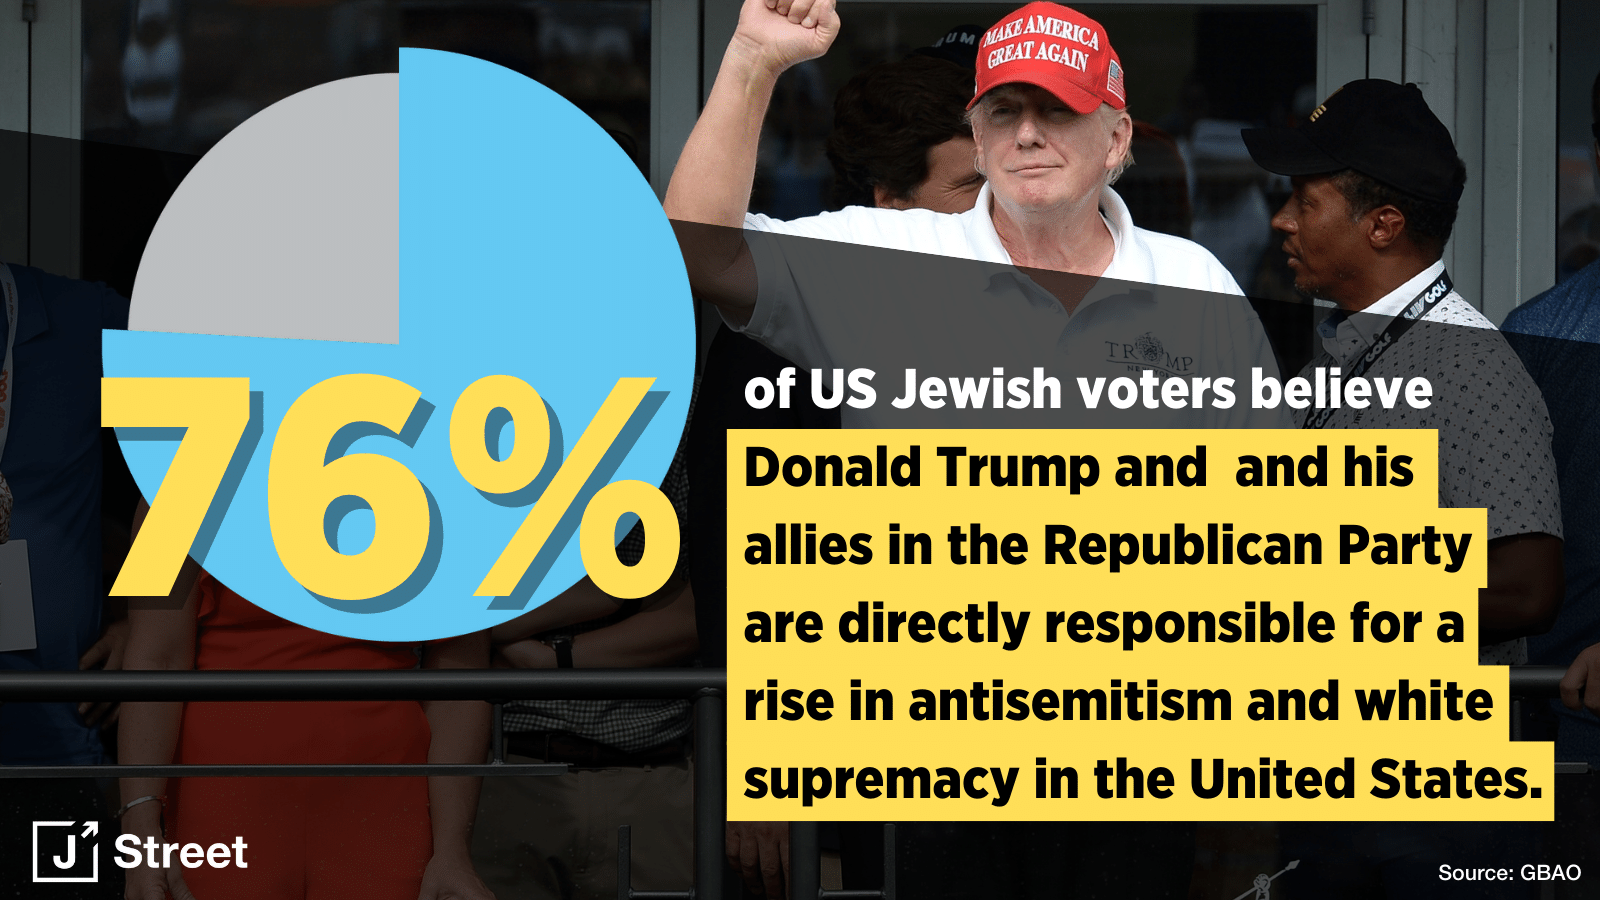 76% believe Donald Trump and his allies in the Republican party are directly responsible for the rise in antisemitism and white supremacy in the United States.